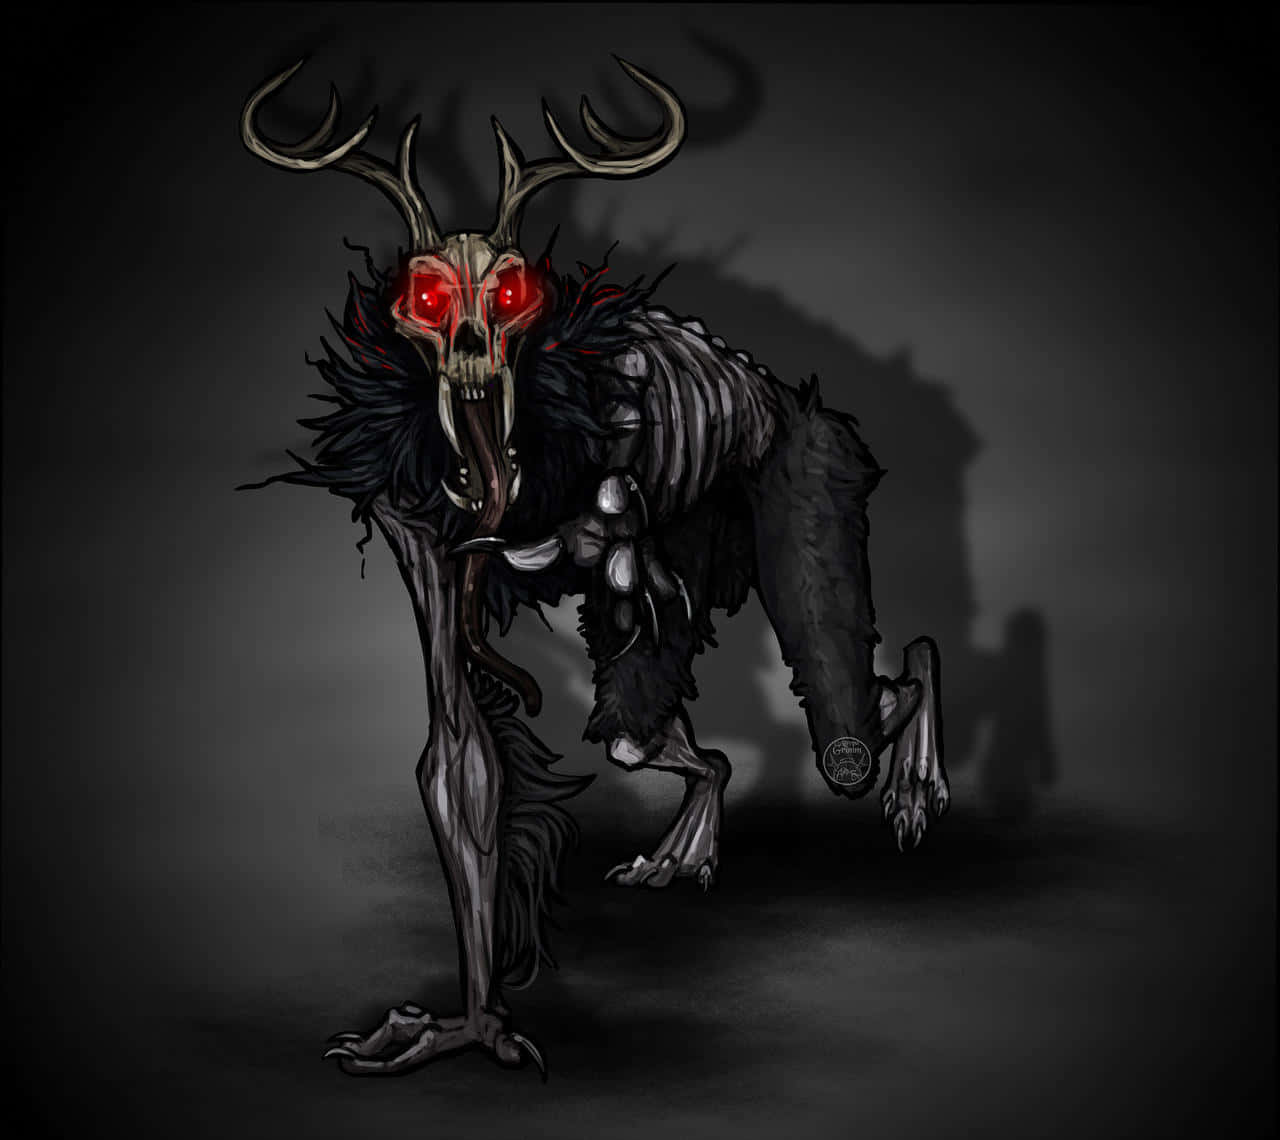 An Illustration of A Dark-skinned Mythical Creature, The Wendigo